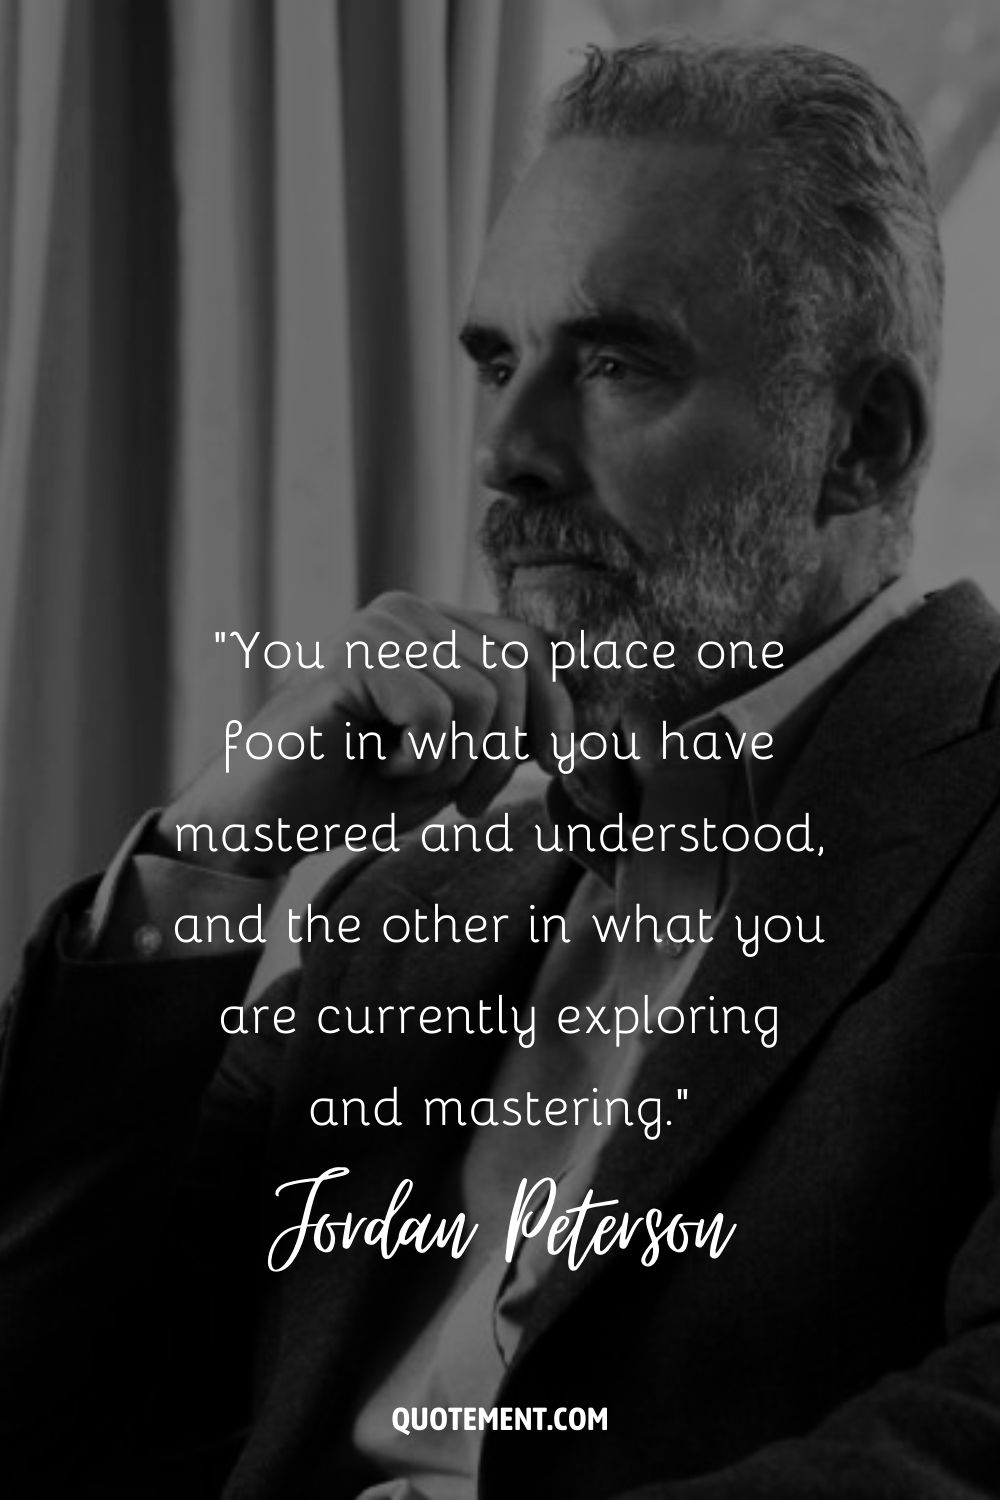 You need to place one foot in what you have mastered and understood, and the other in what you are currently exploring and mastering